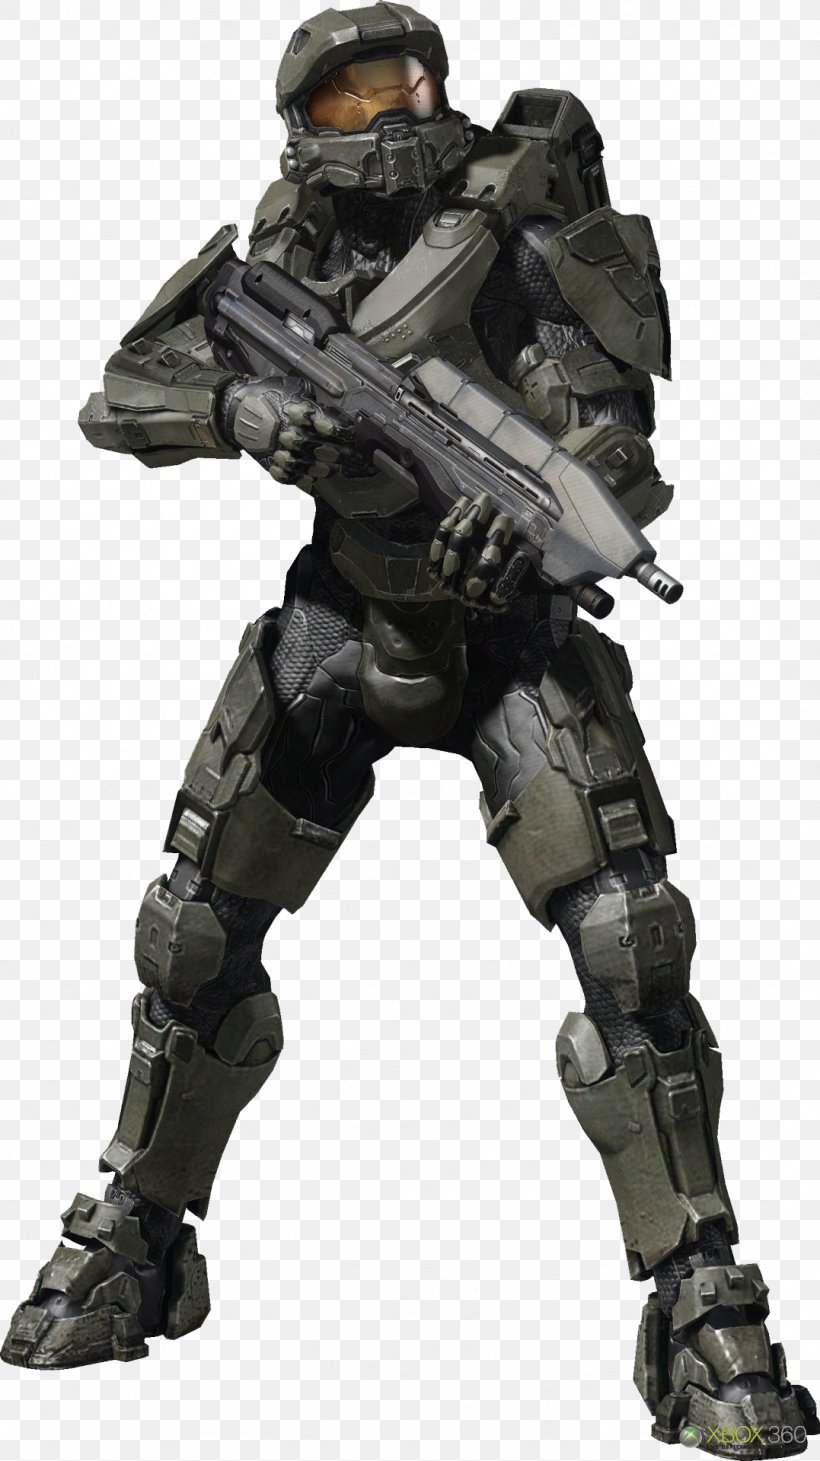 Halo: The Master Chief Collection Halo 4 Halo 5: Guardians Halo 3: ODST Halo 2, PNG, 1077x1920px, Halo The Master Chief Collection, Action Figure, Cortana, Factions Of Halo, Figurine Download Free